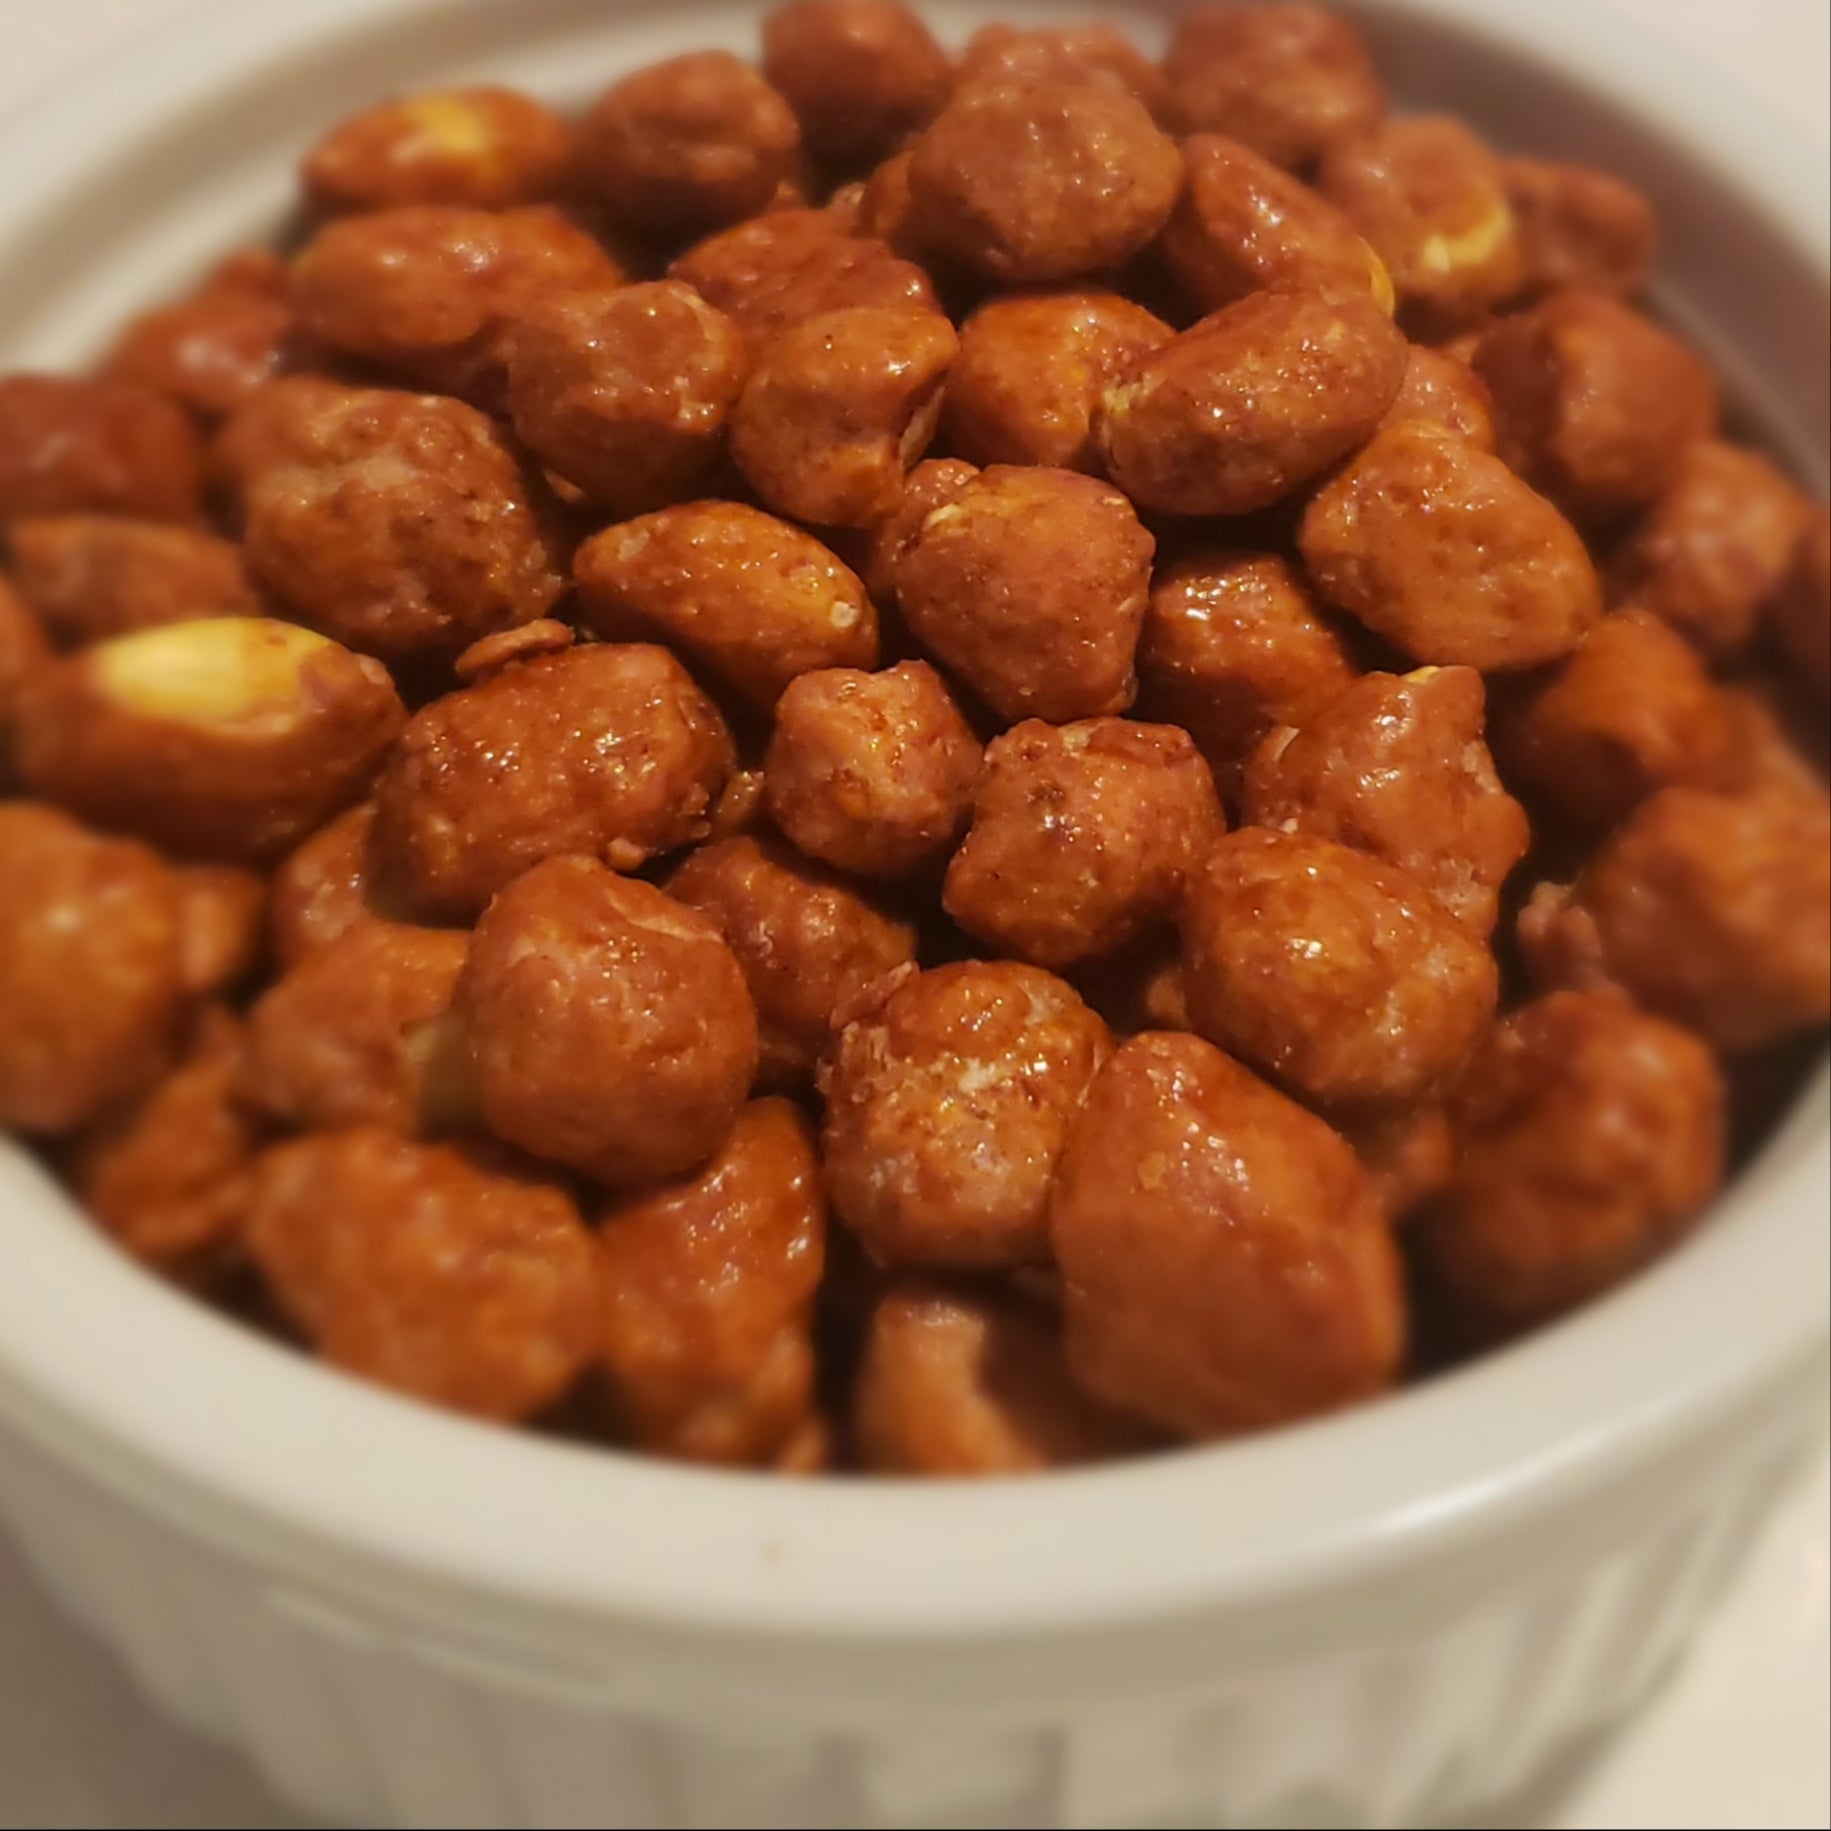 Butter Toffee peanuts (2 LB) - The Jerky Hut online